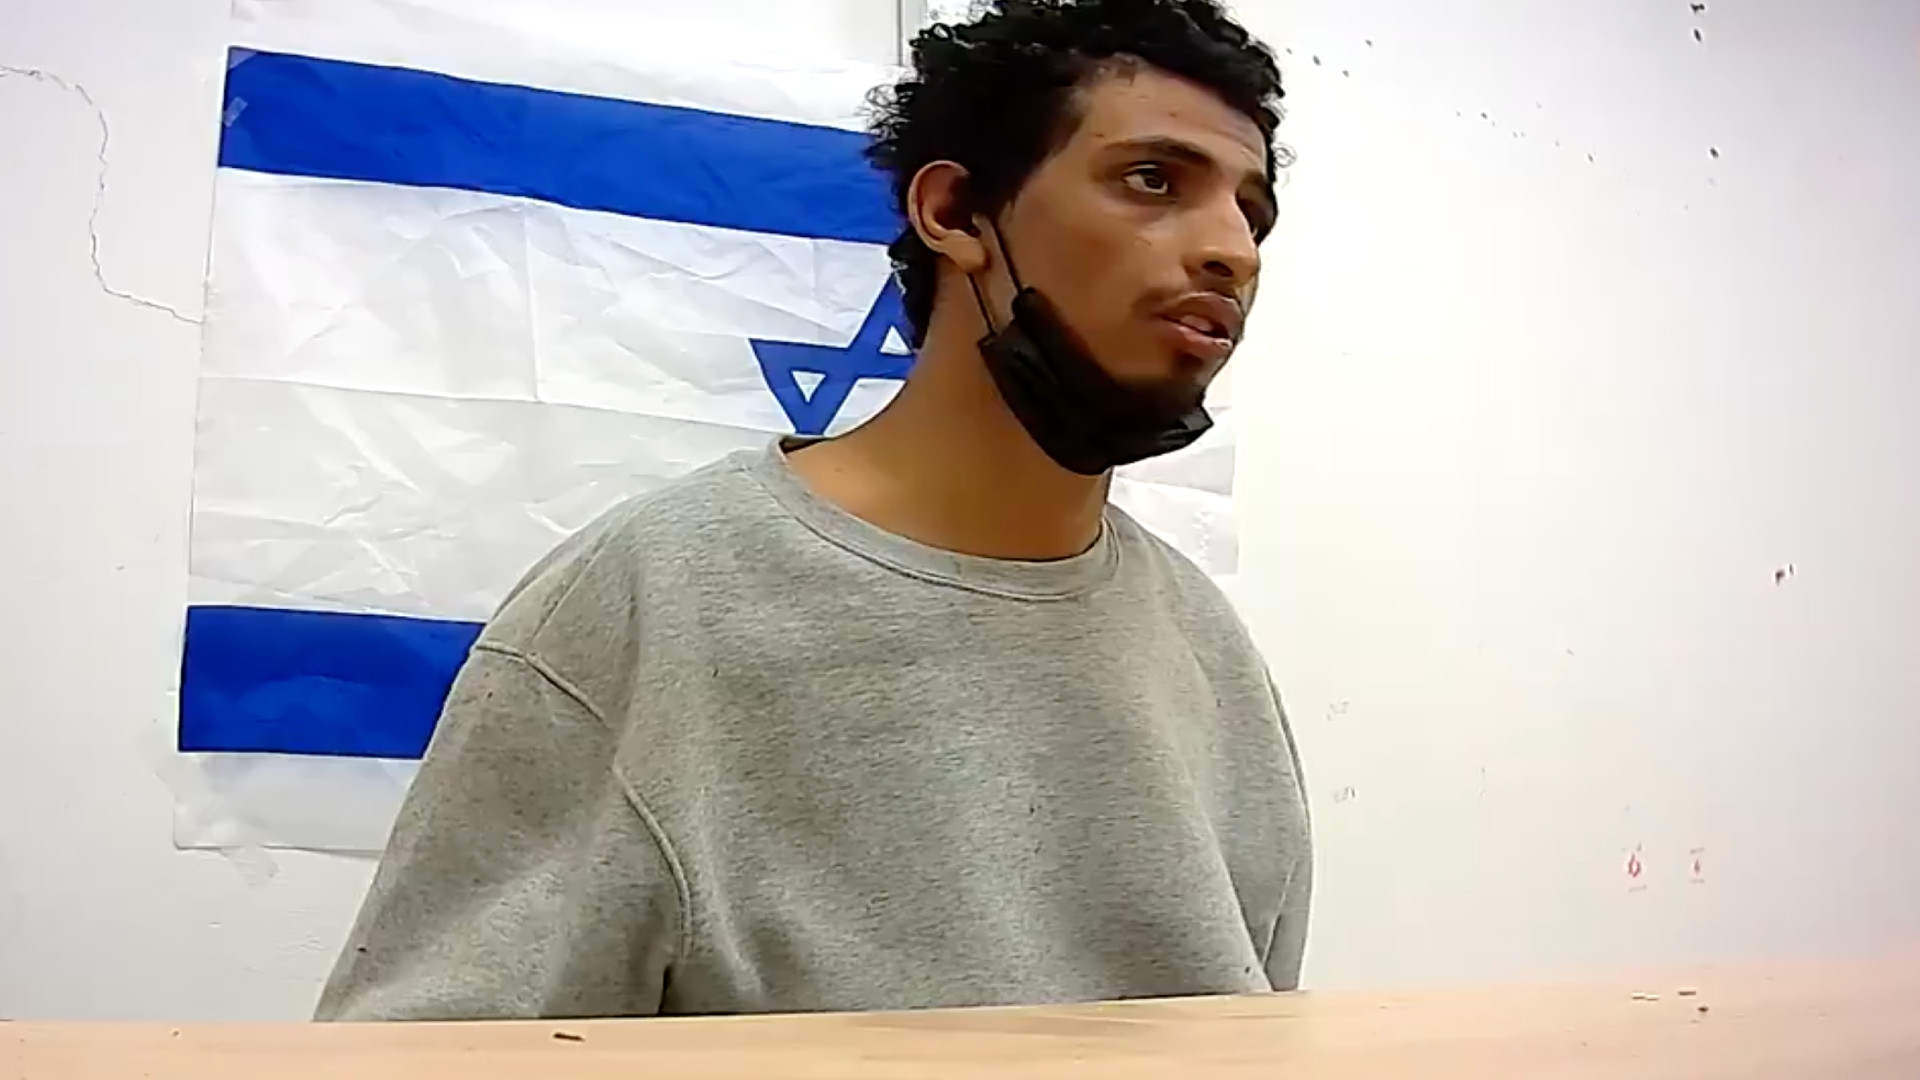 War on Gaza: Israel likely tortured Palestinian to record rape confession, say rights